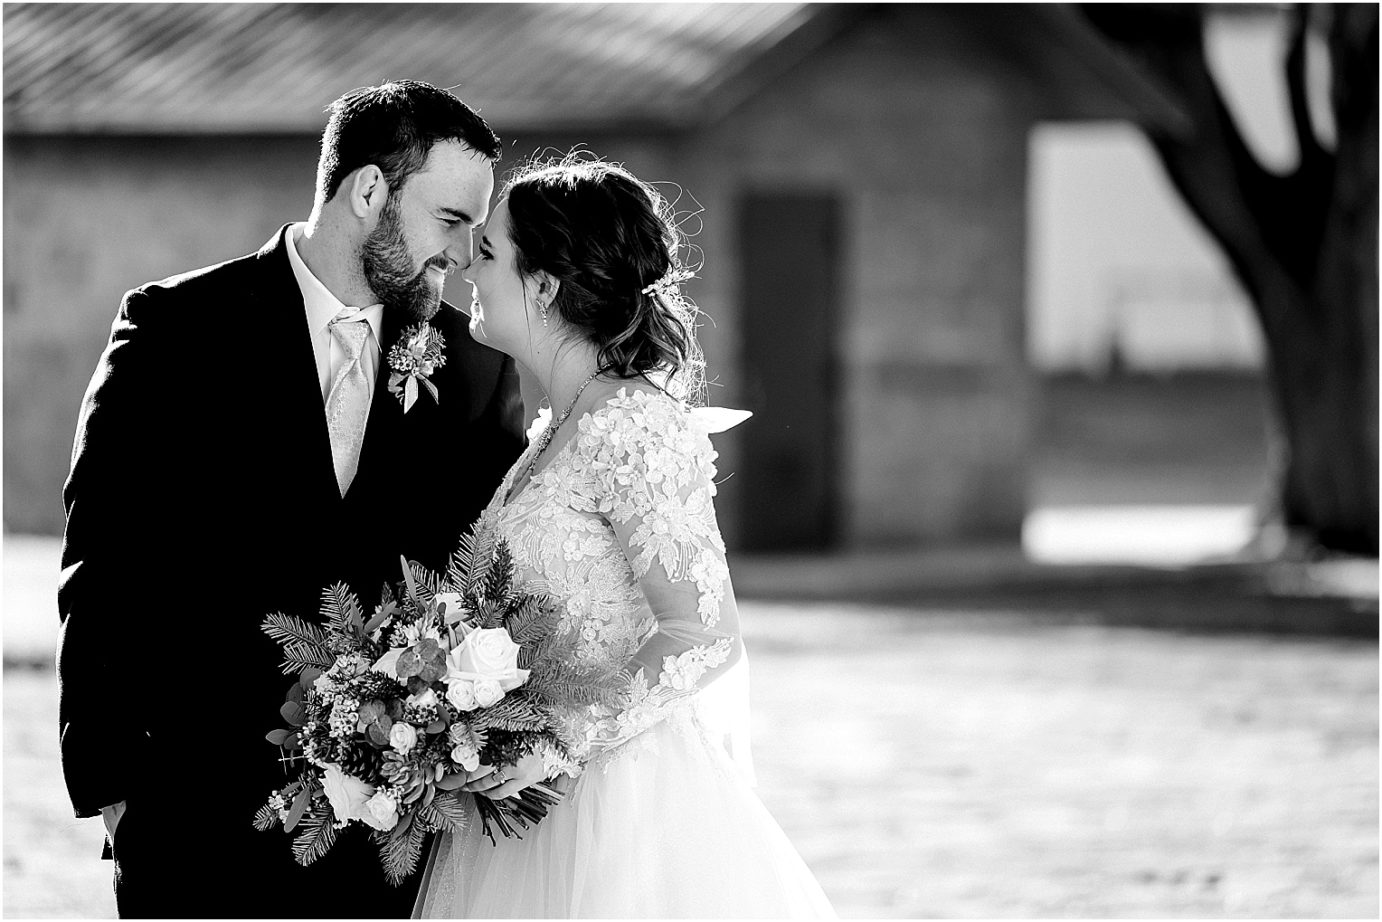 Wedding at The Armory Ellensburg Photographer Andrew and Stella bride and groom portraits